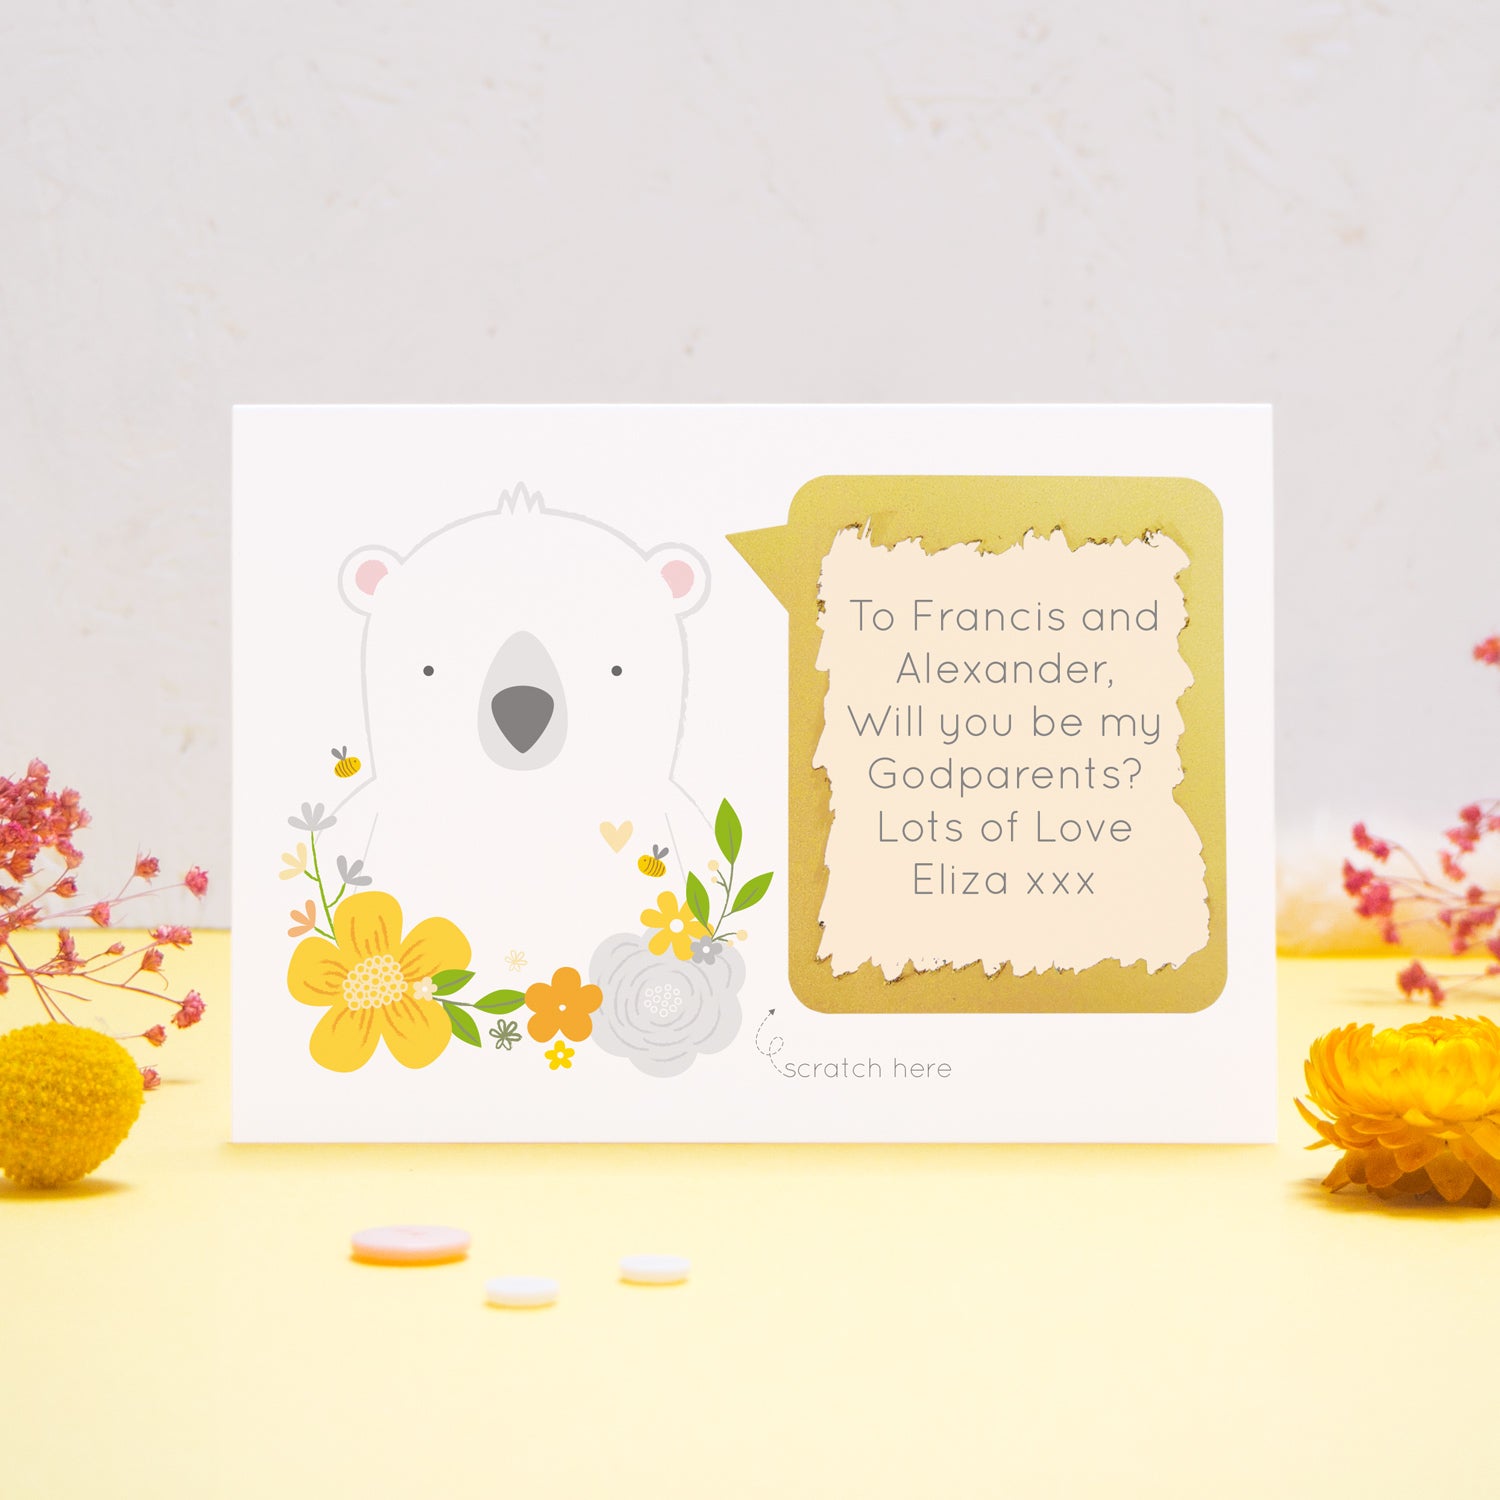 A personalised will you be my godparents scratch card featuring a white bear, yellow flowers and a peach text box. This has been shot on a yellow and grey background with flowers. The gold panel has been scratched away to reveal the message.